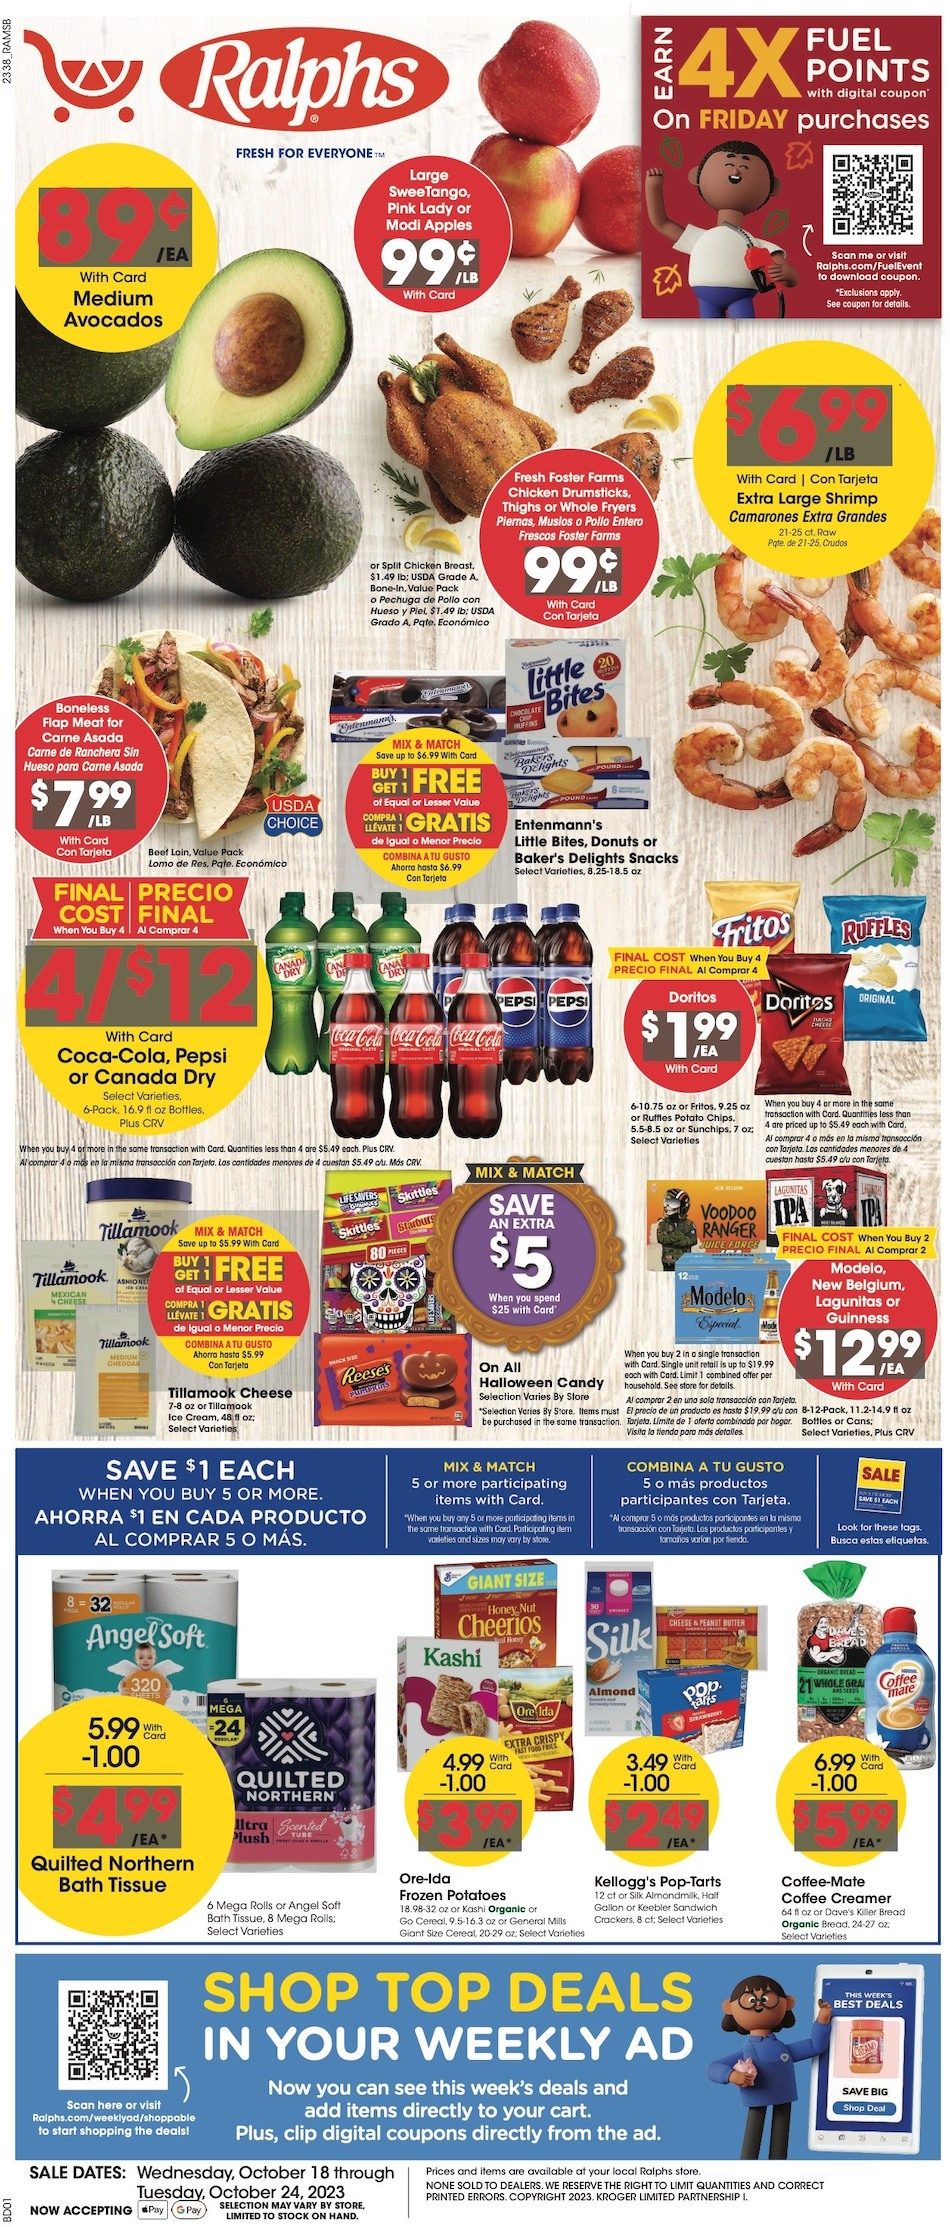 Ralphs Weekly Ad 18th – 24th October 2023 Page 1